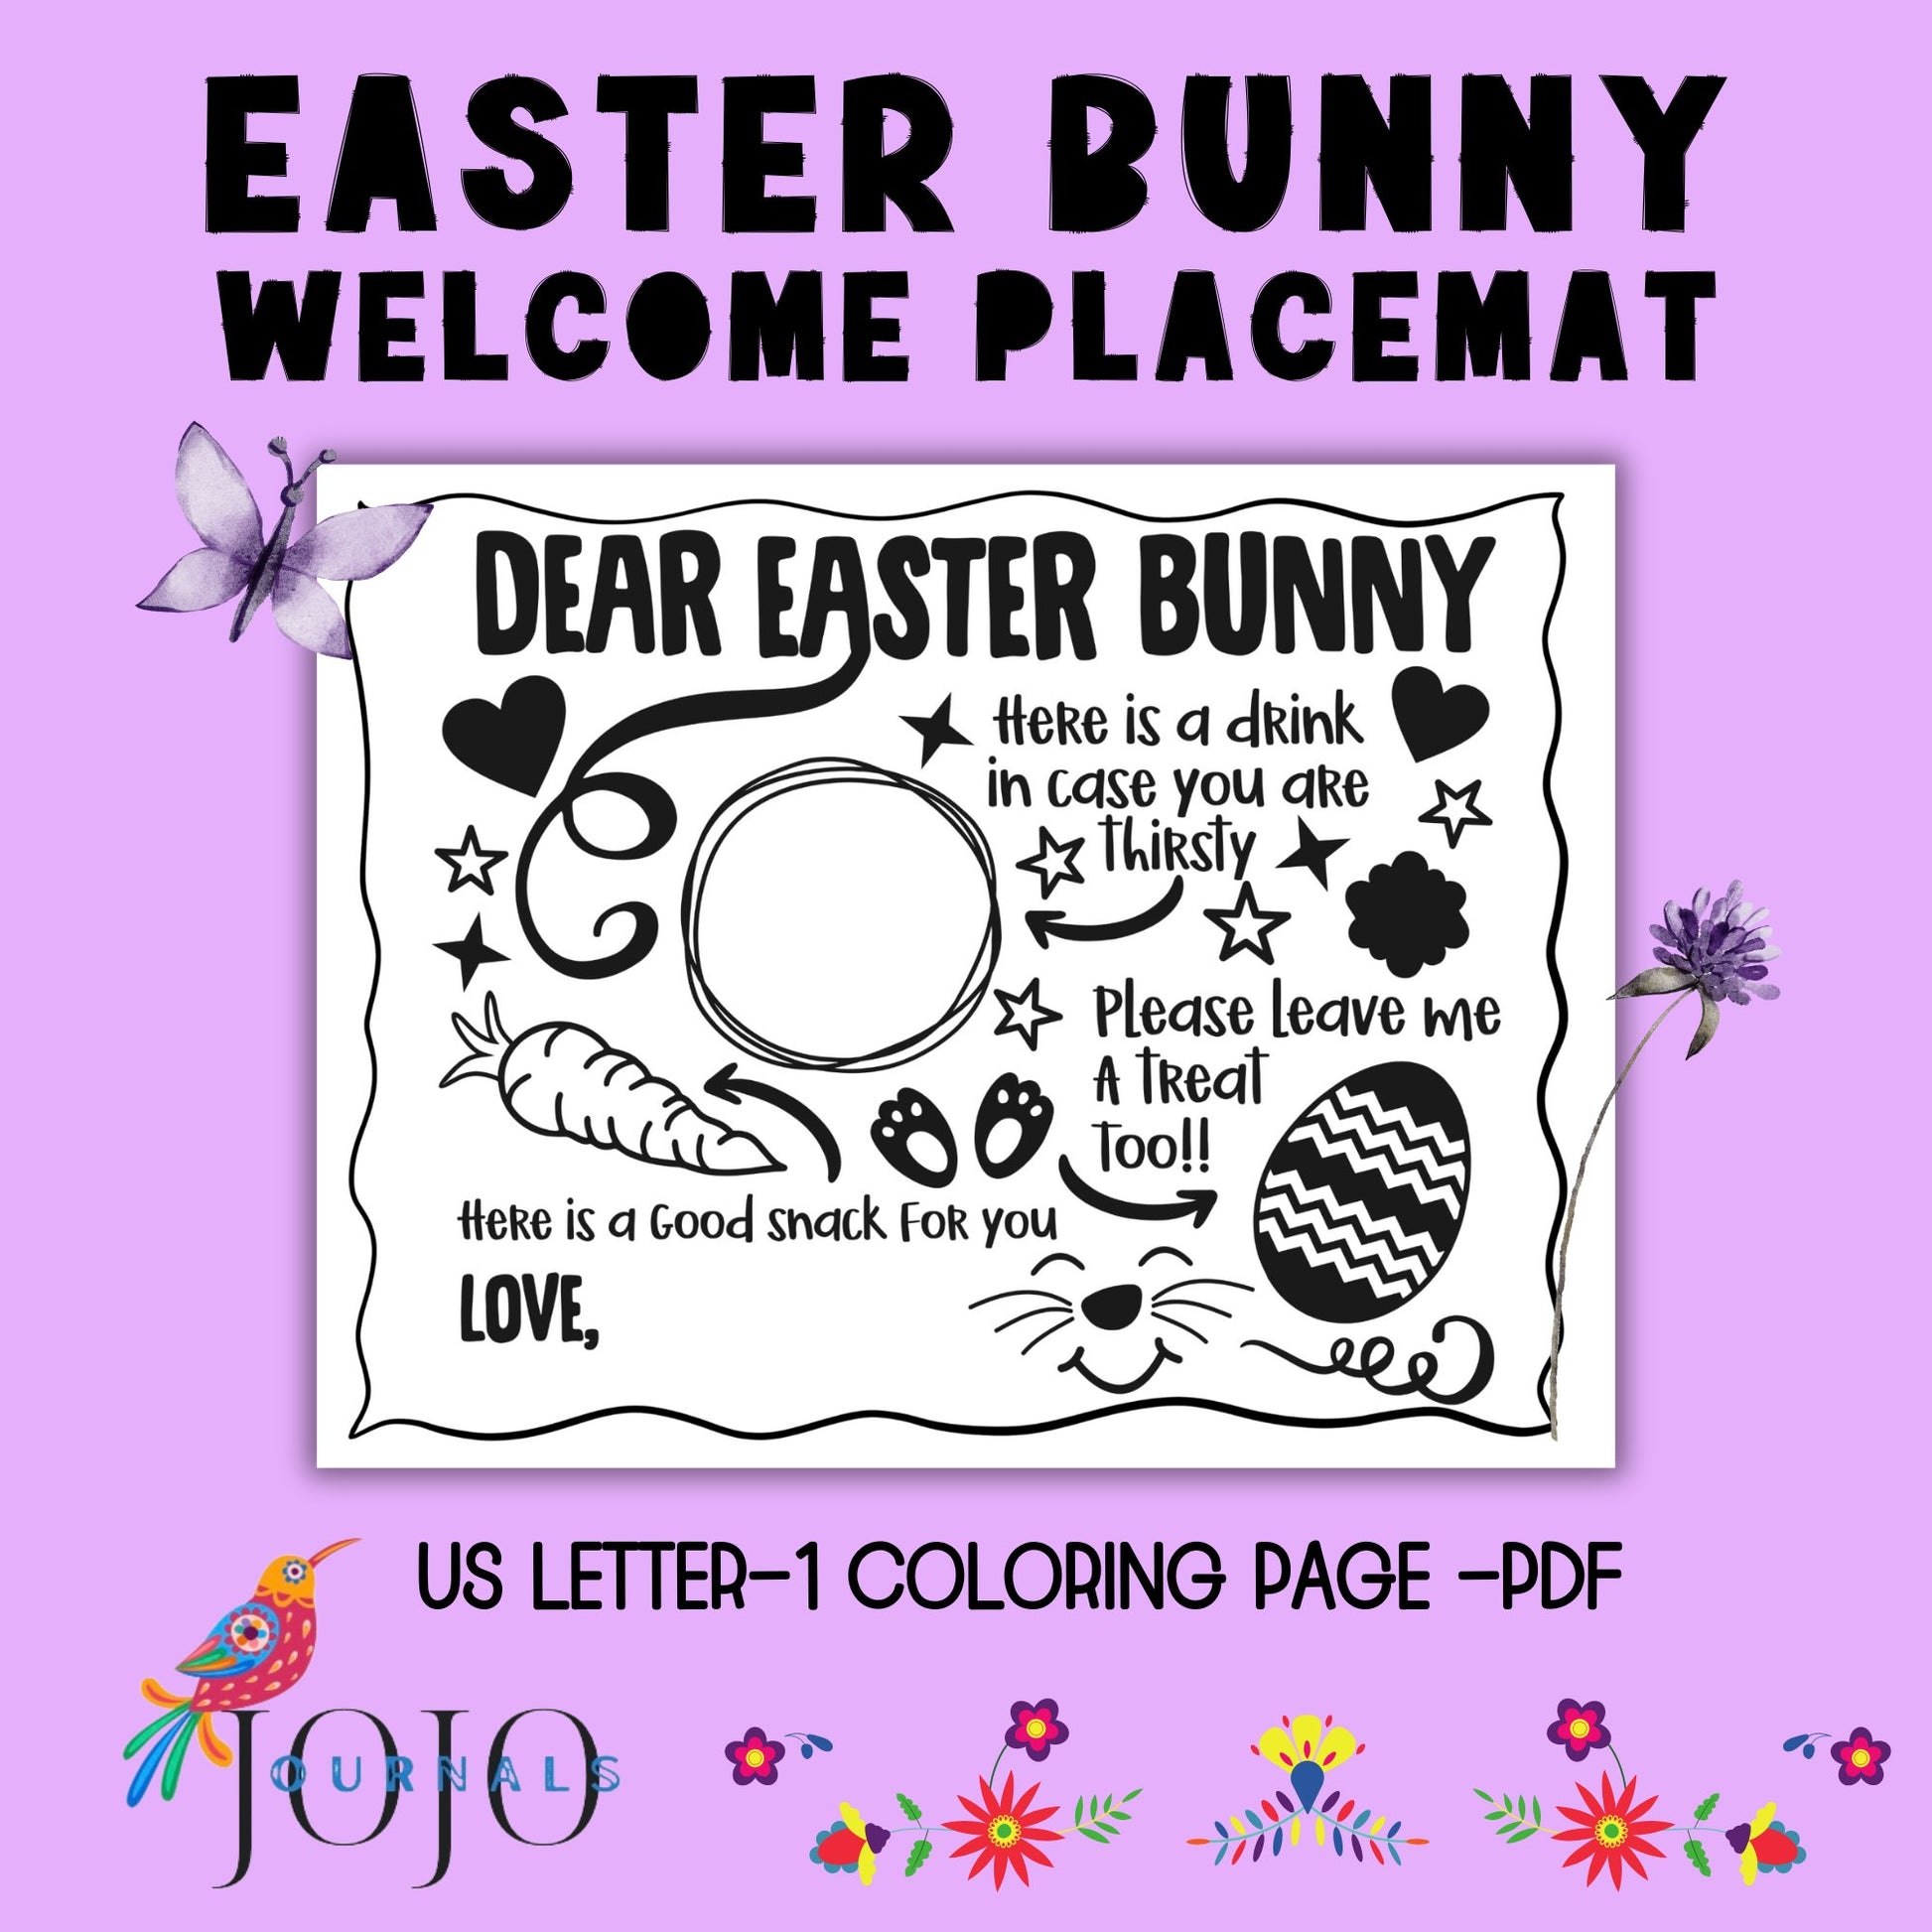 Easter Bunny- Coloring Page Placemats-Printable US Letter, Instant Download PDF - Fiesta By JoJo Journals